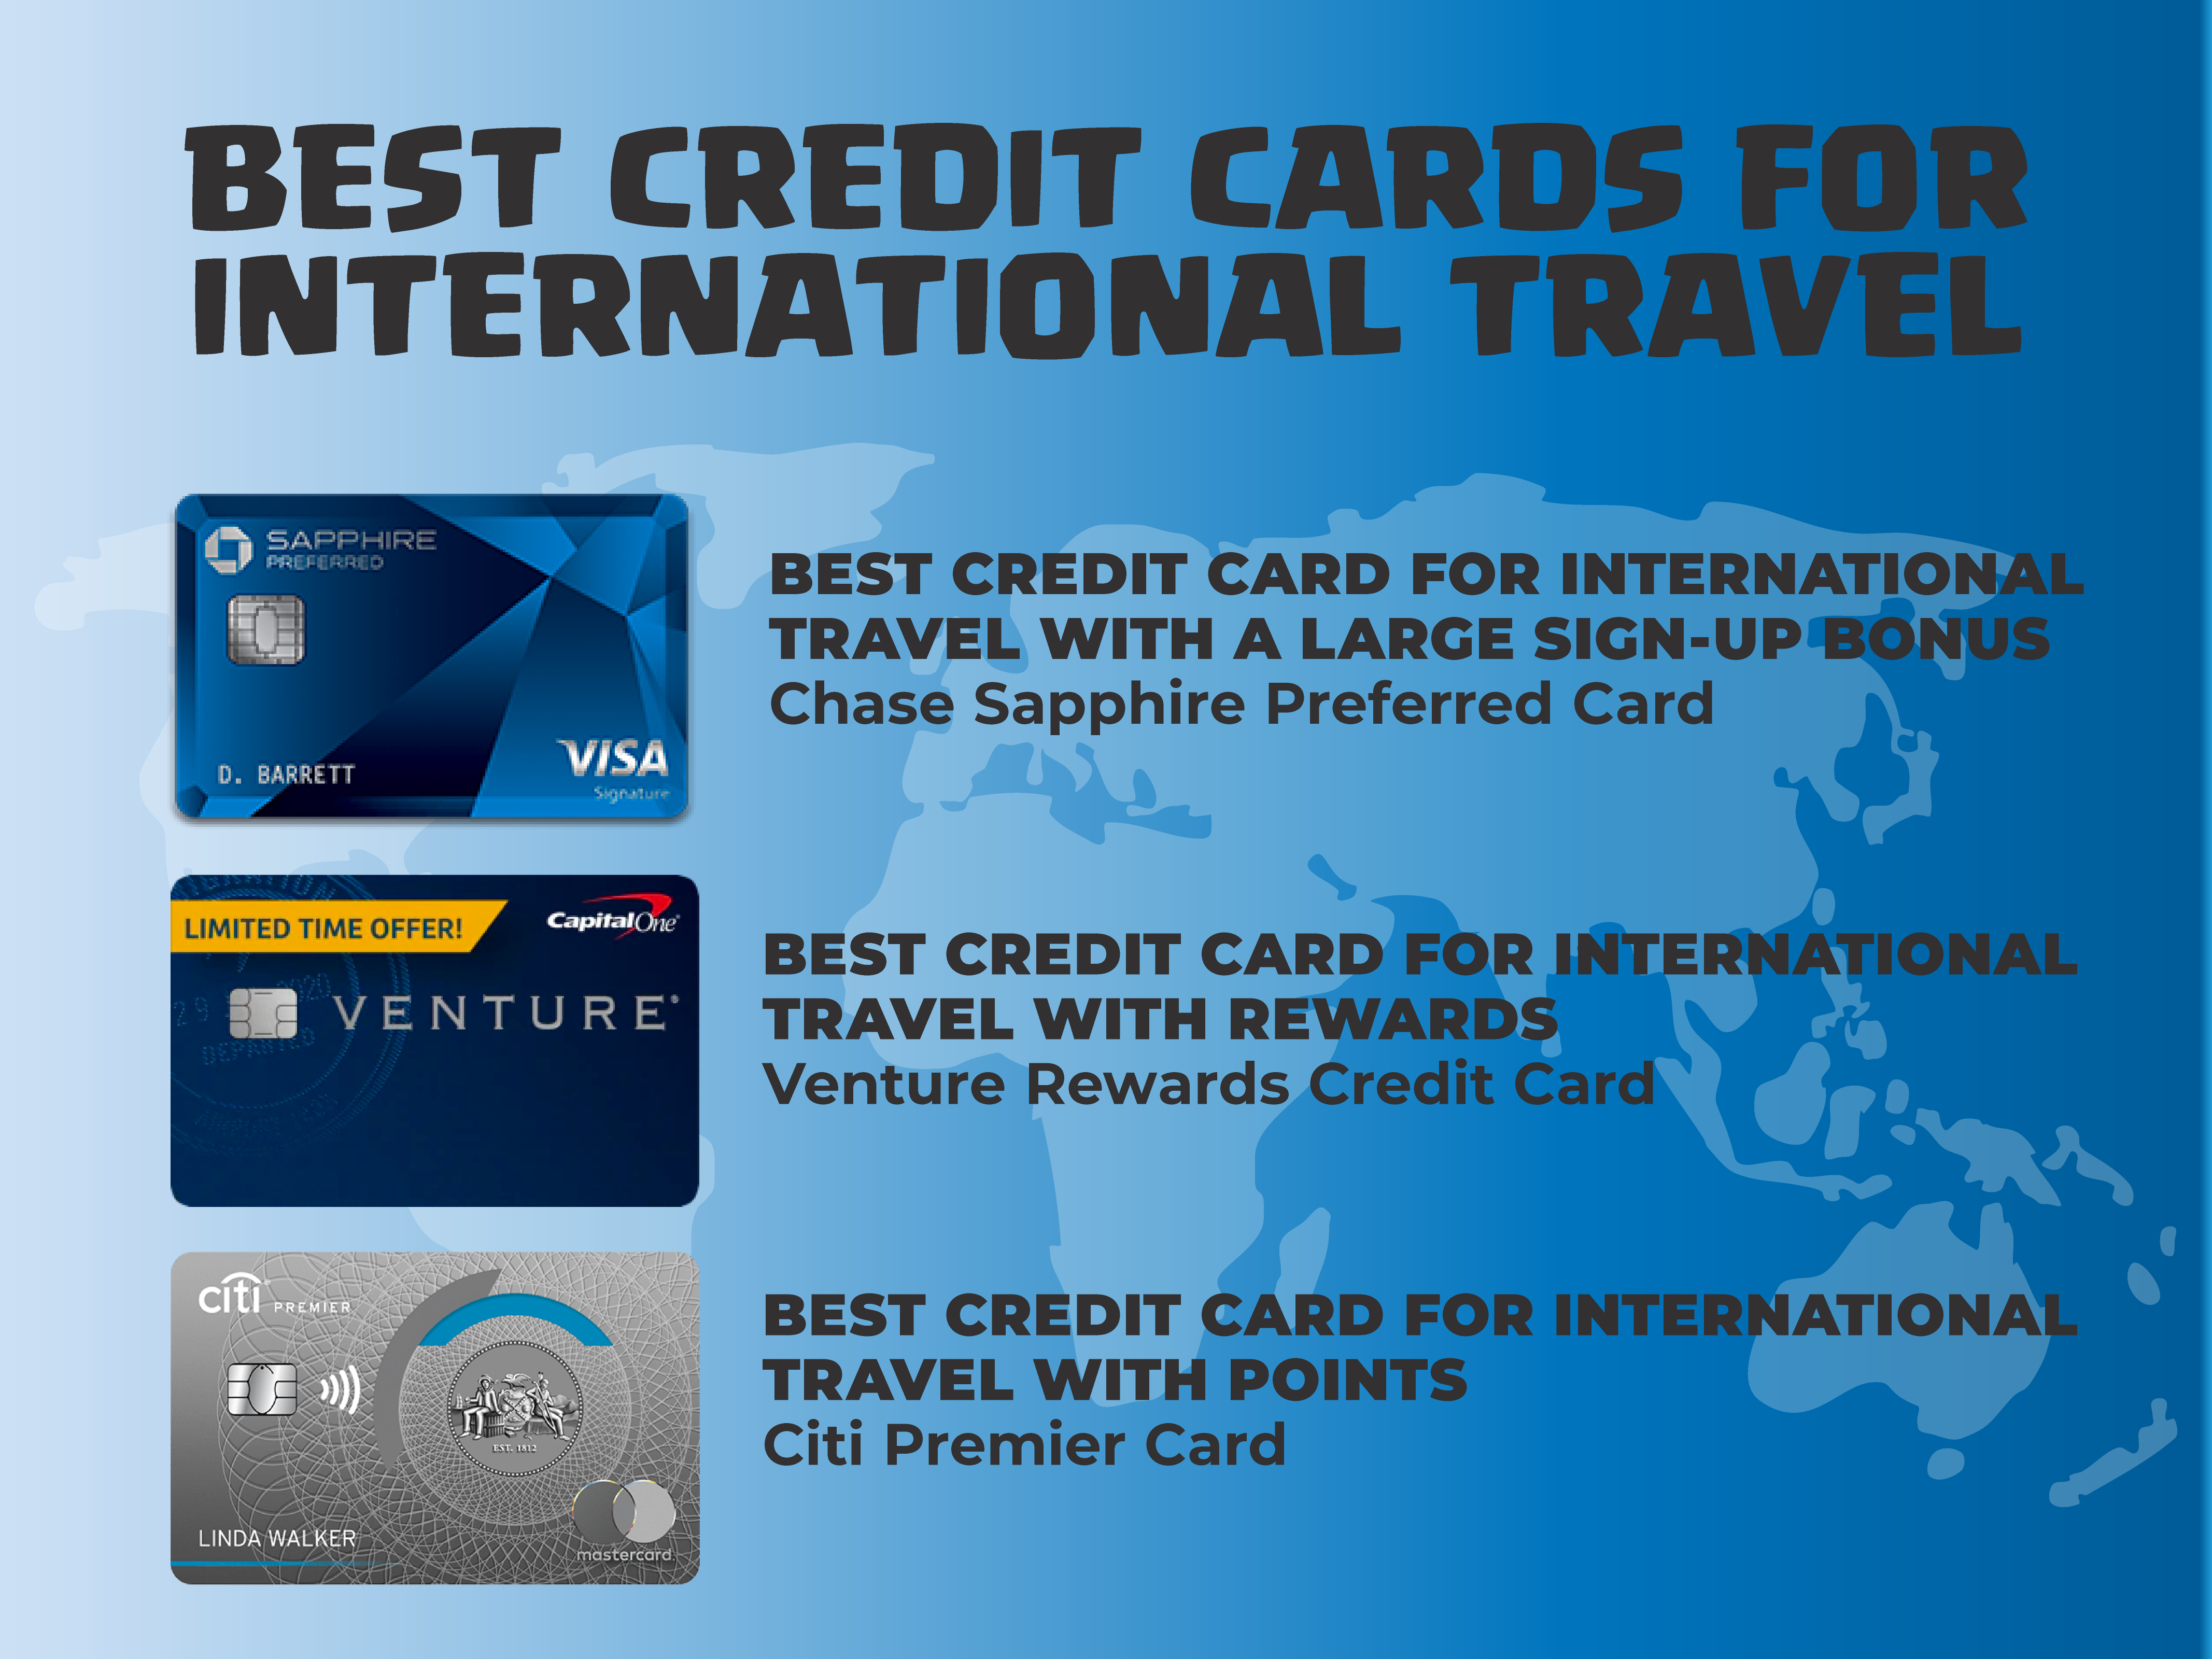 Graphic image that lists the Best Credit Cards for International Travel